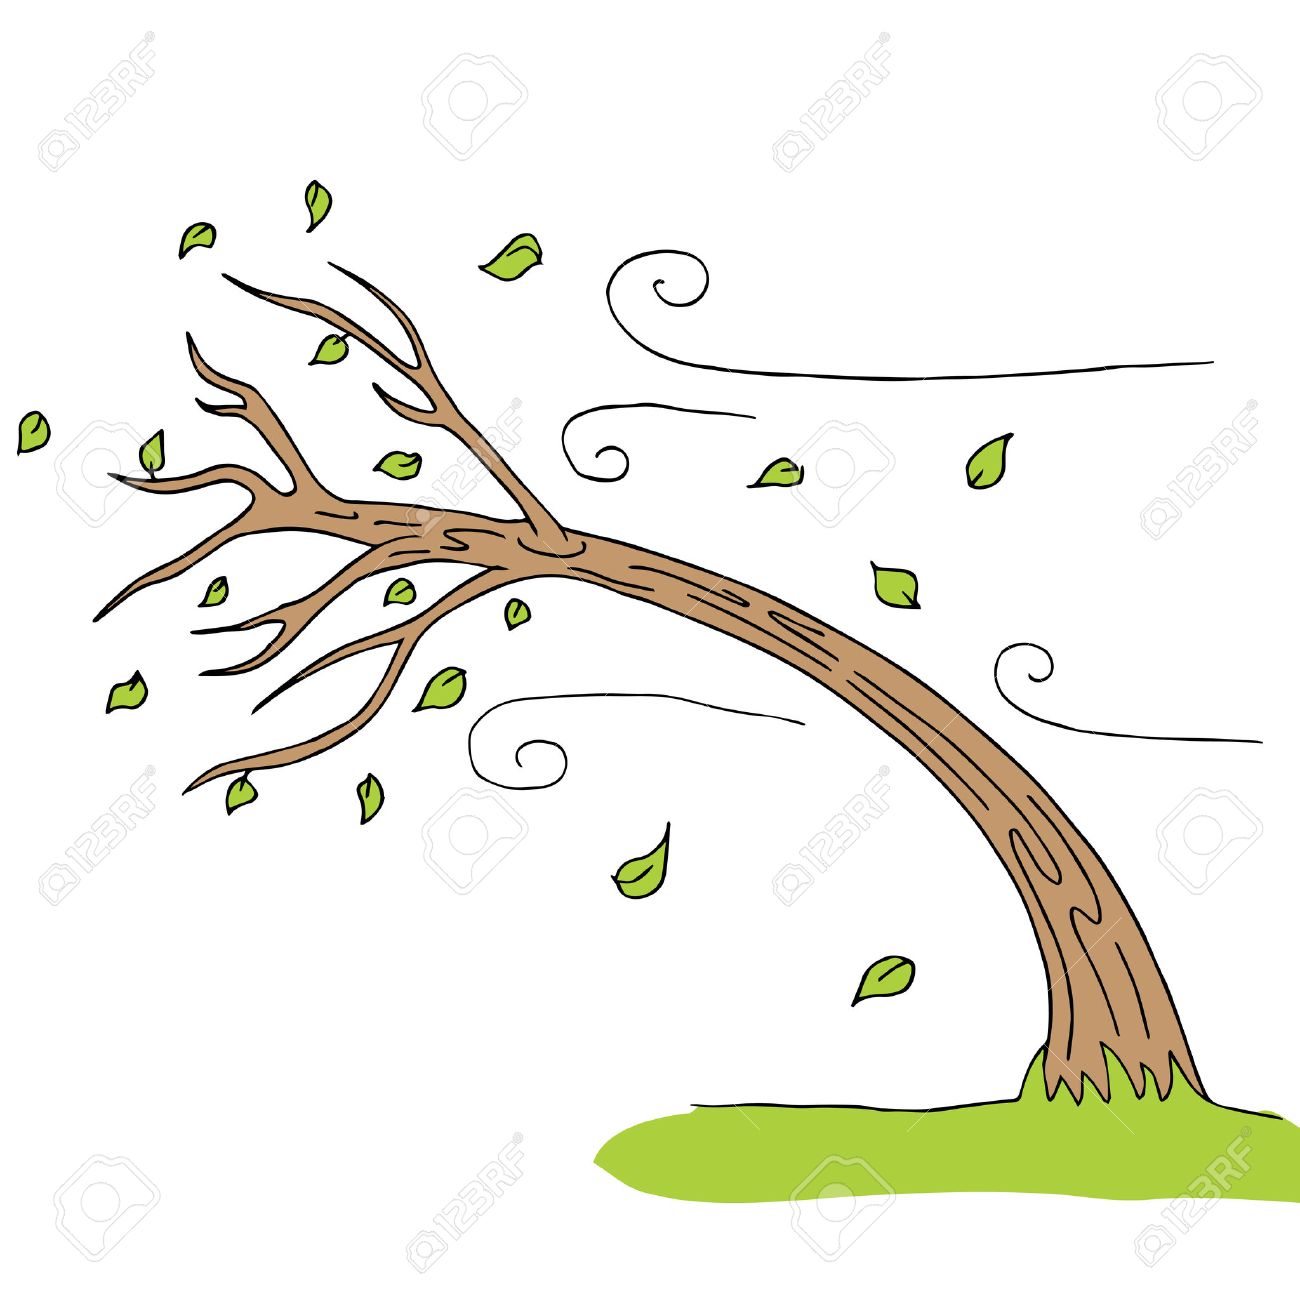 a wind blown tree. Stock Vector - 31239731